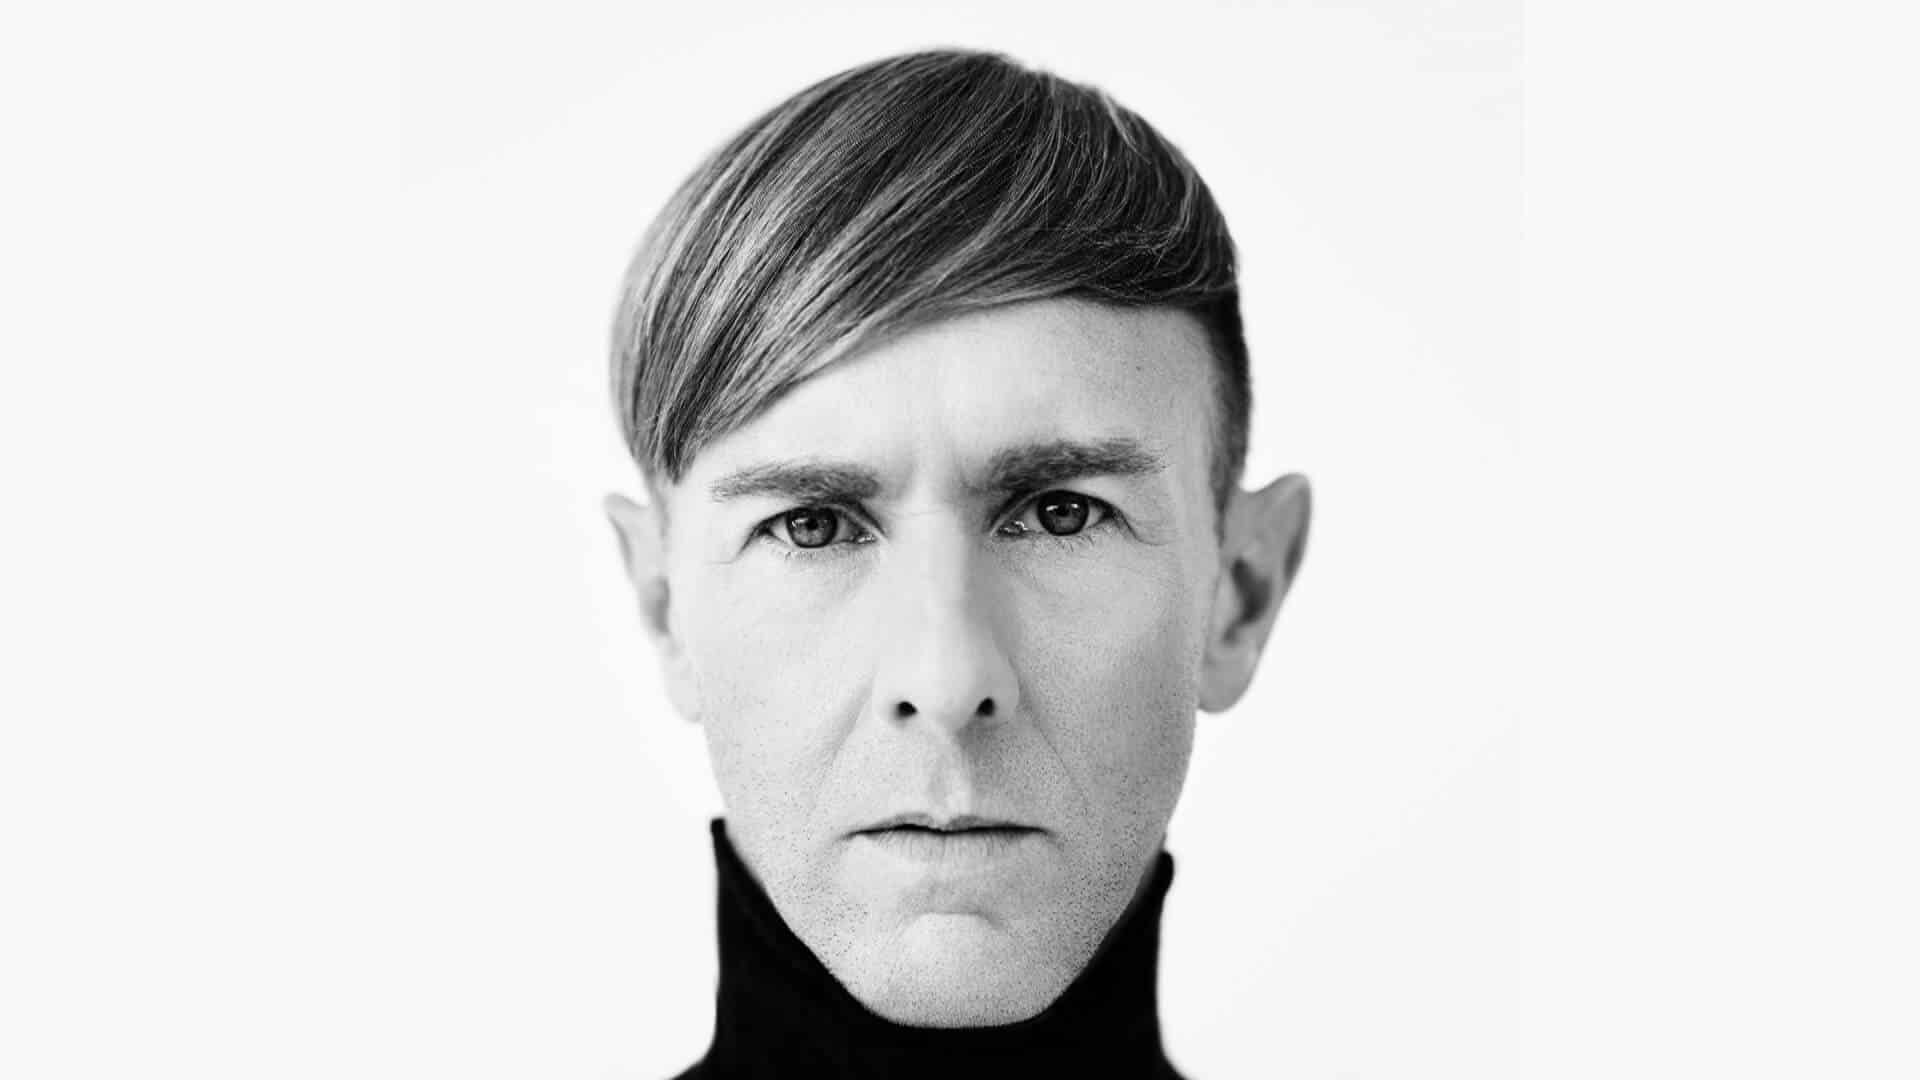 Richie Hawtin acquires Aslice during his ‘From Our Minds’ tour in a bid to bridge the pay gap within the dance scene